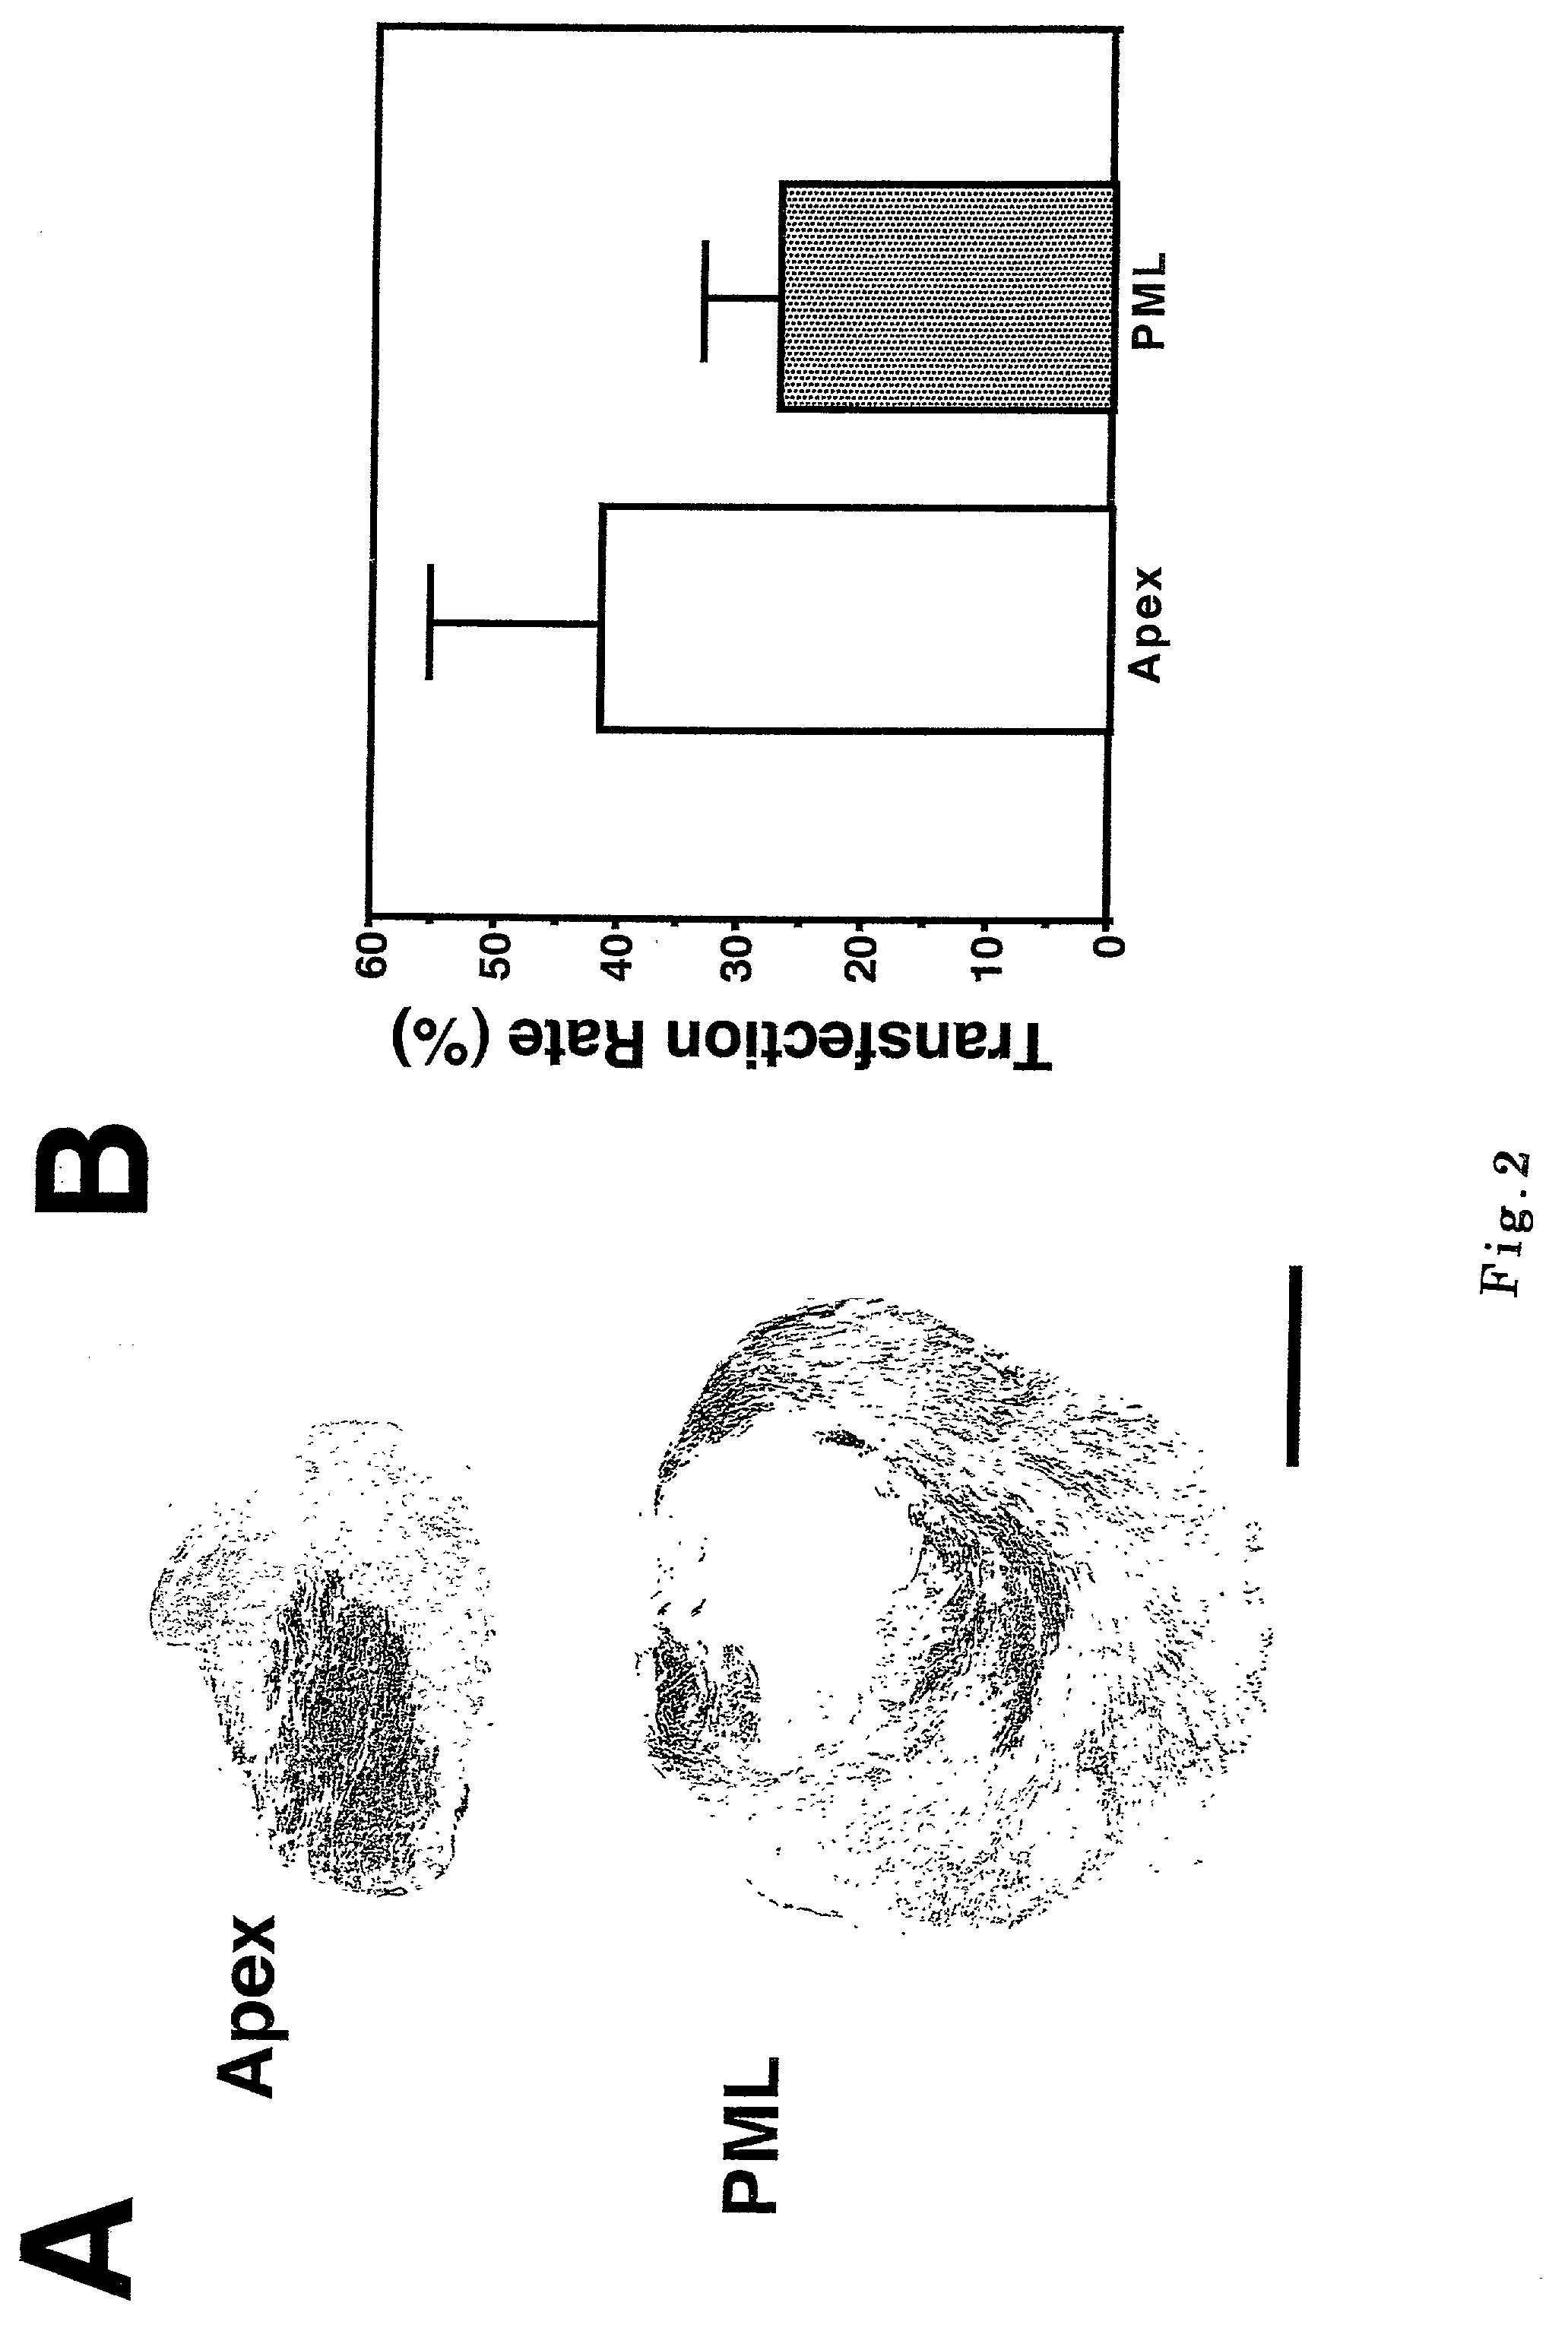 Agent for gene therapy of dilated cardomyopathy